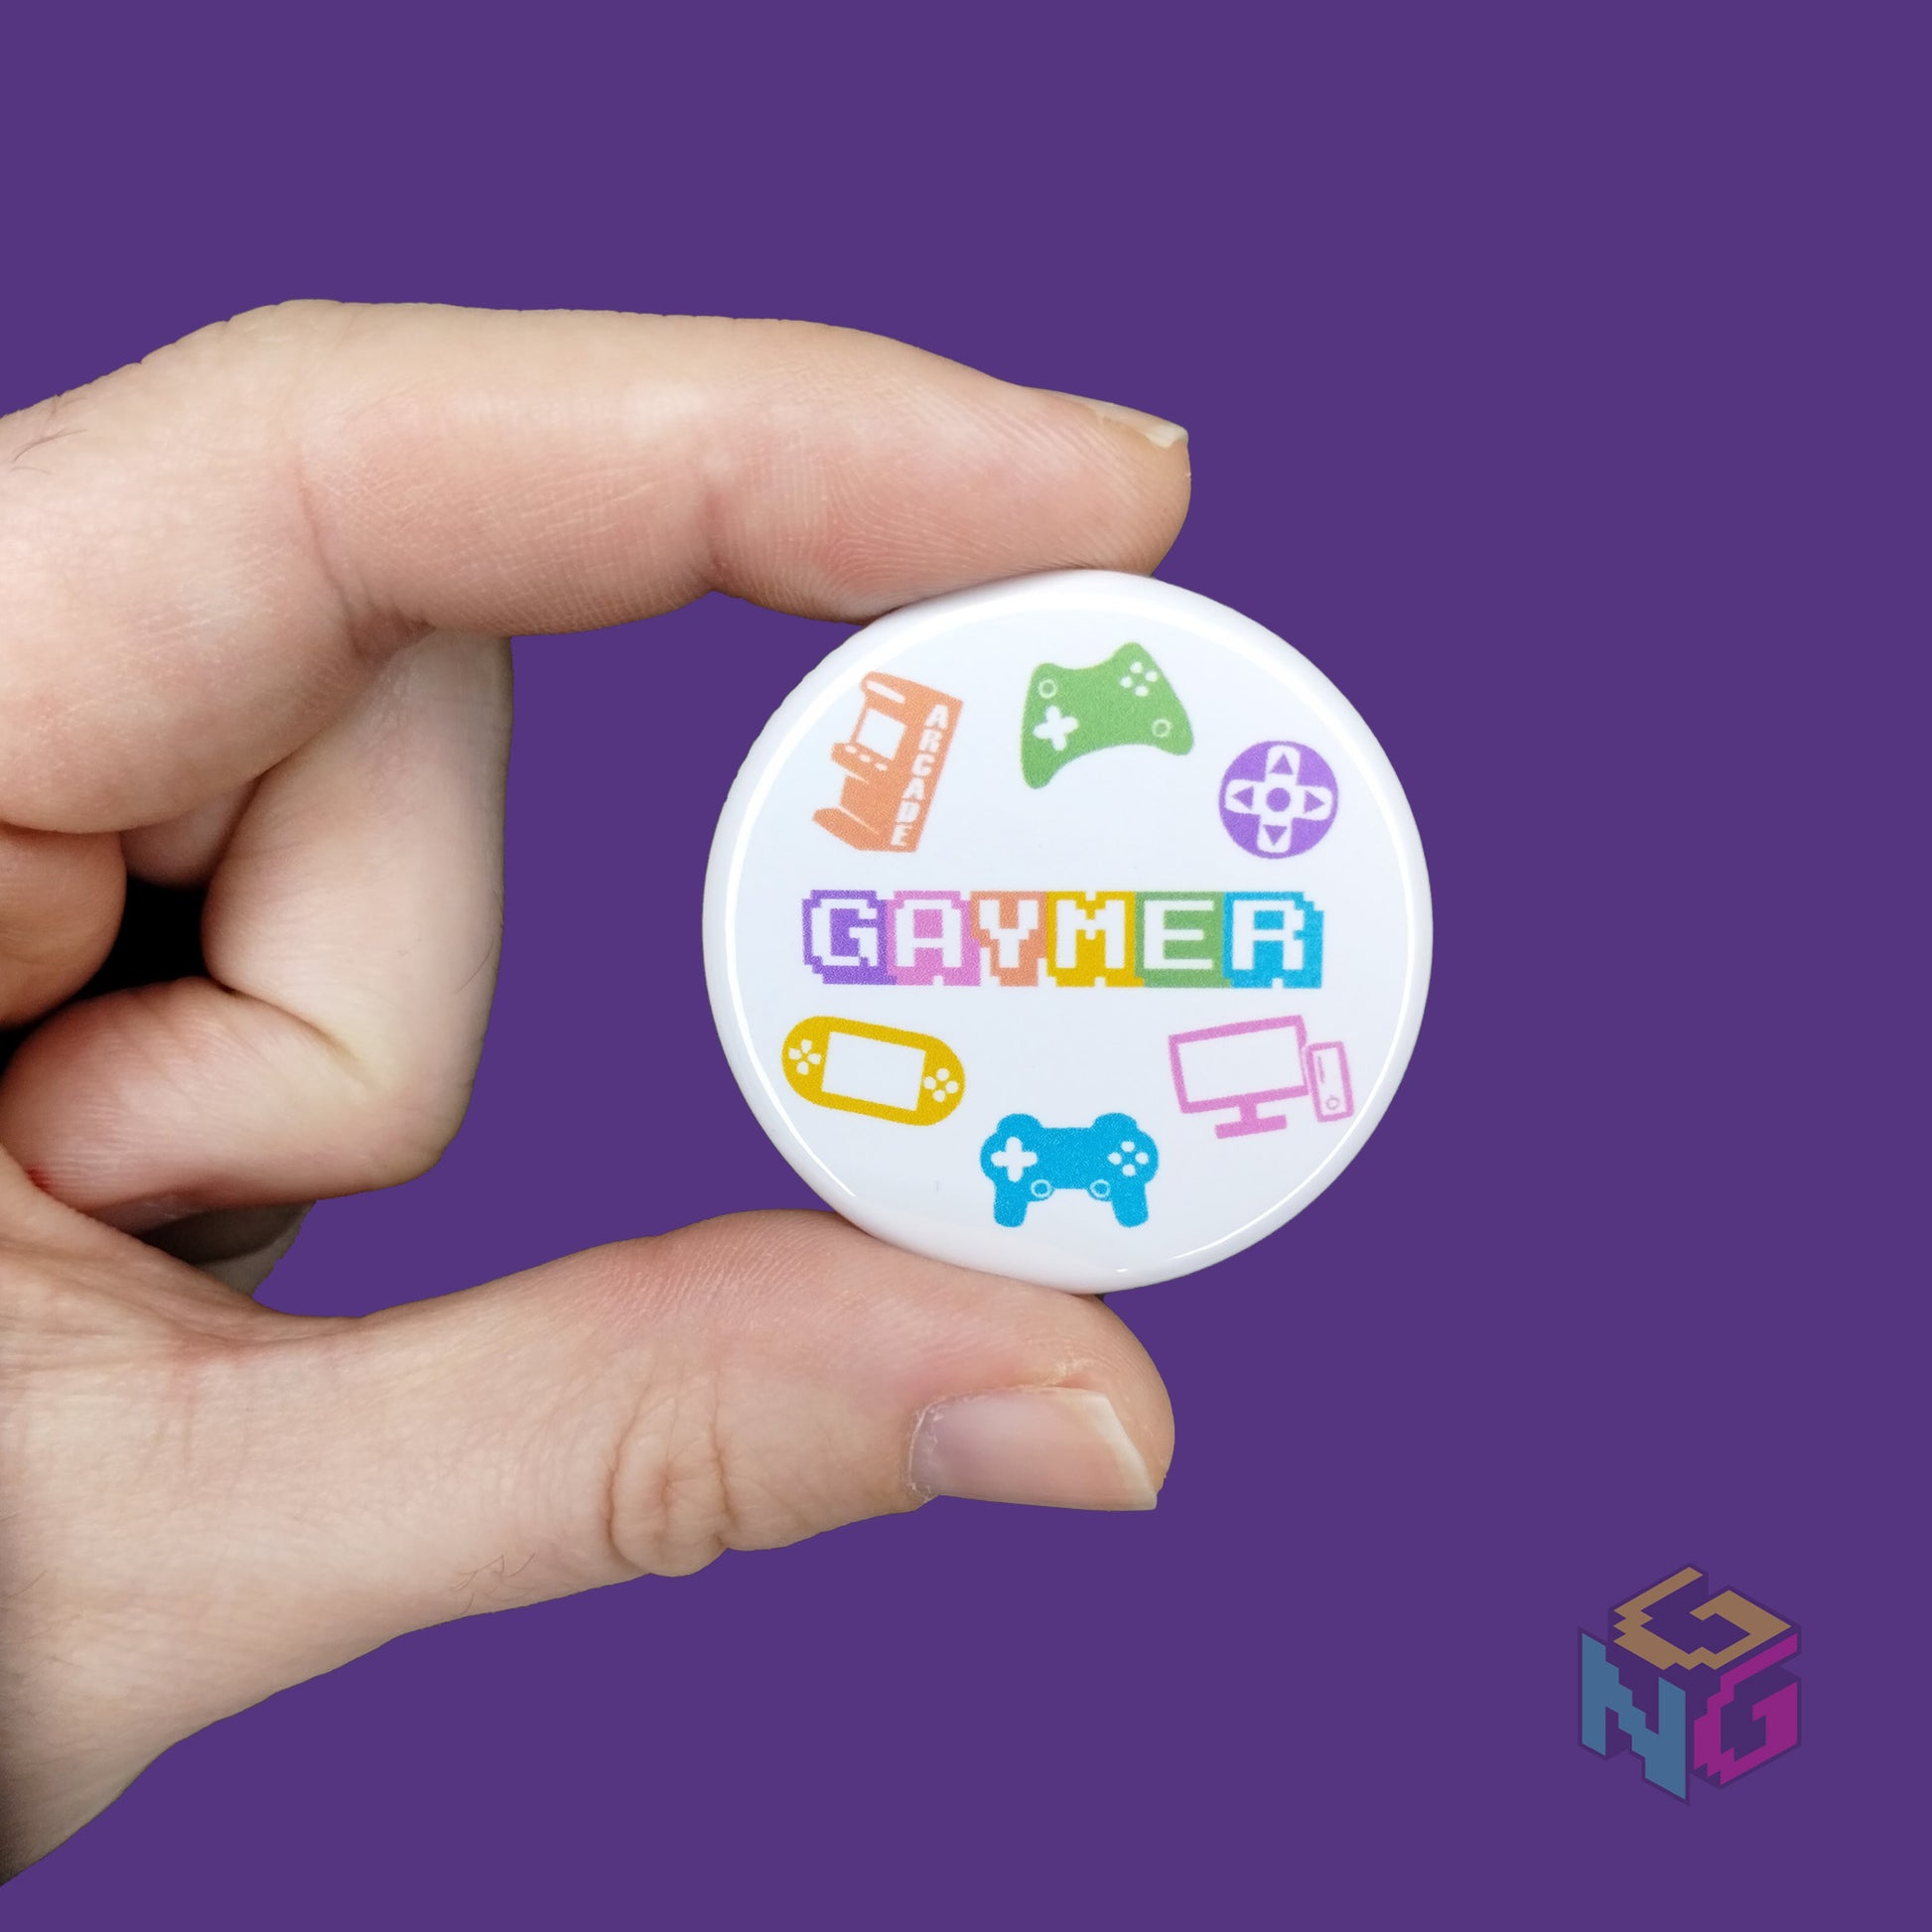 light skinned hand holding small round gaymer button on purple background